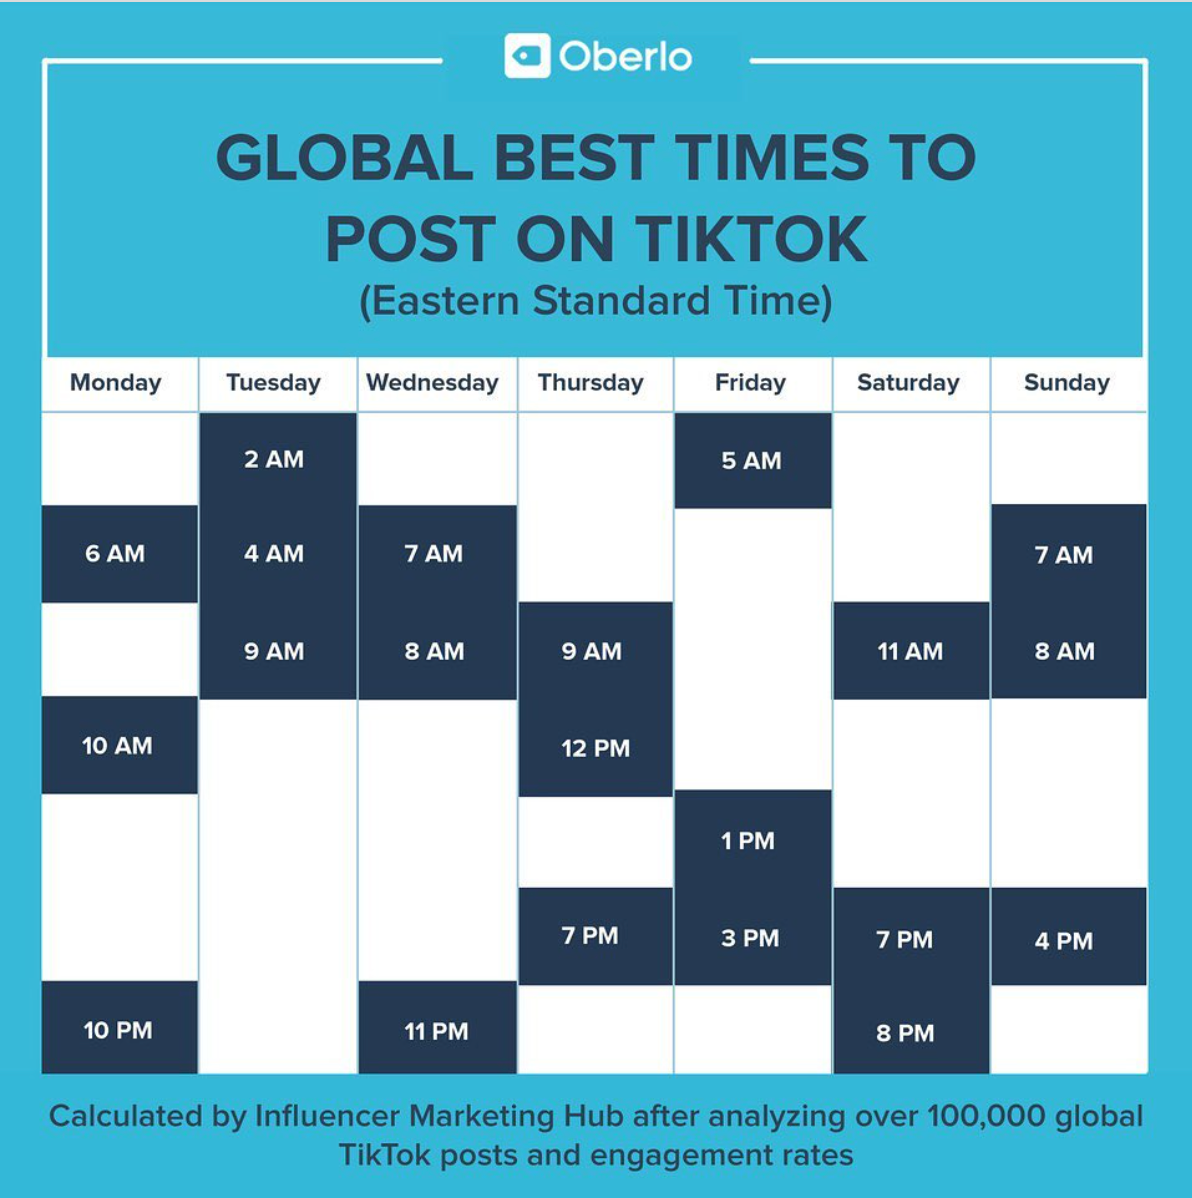 A schedule of optimal posting times on TikTok